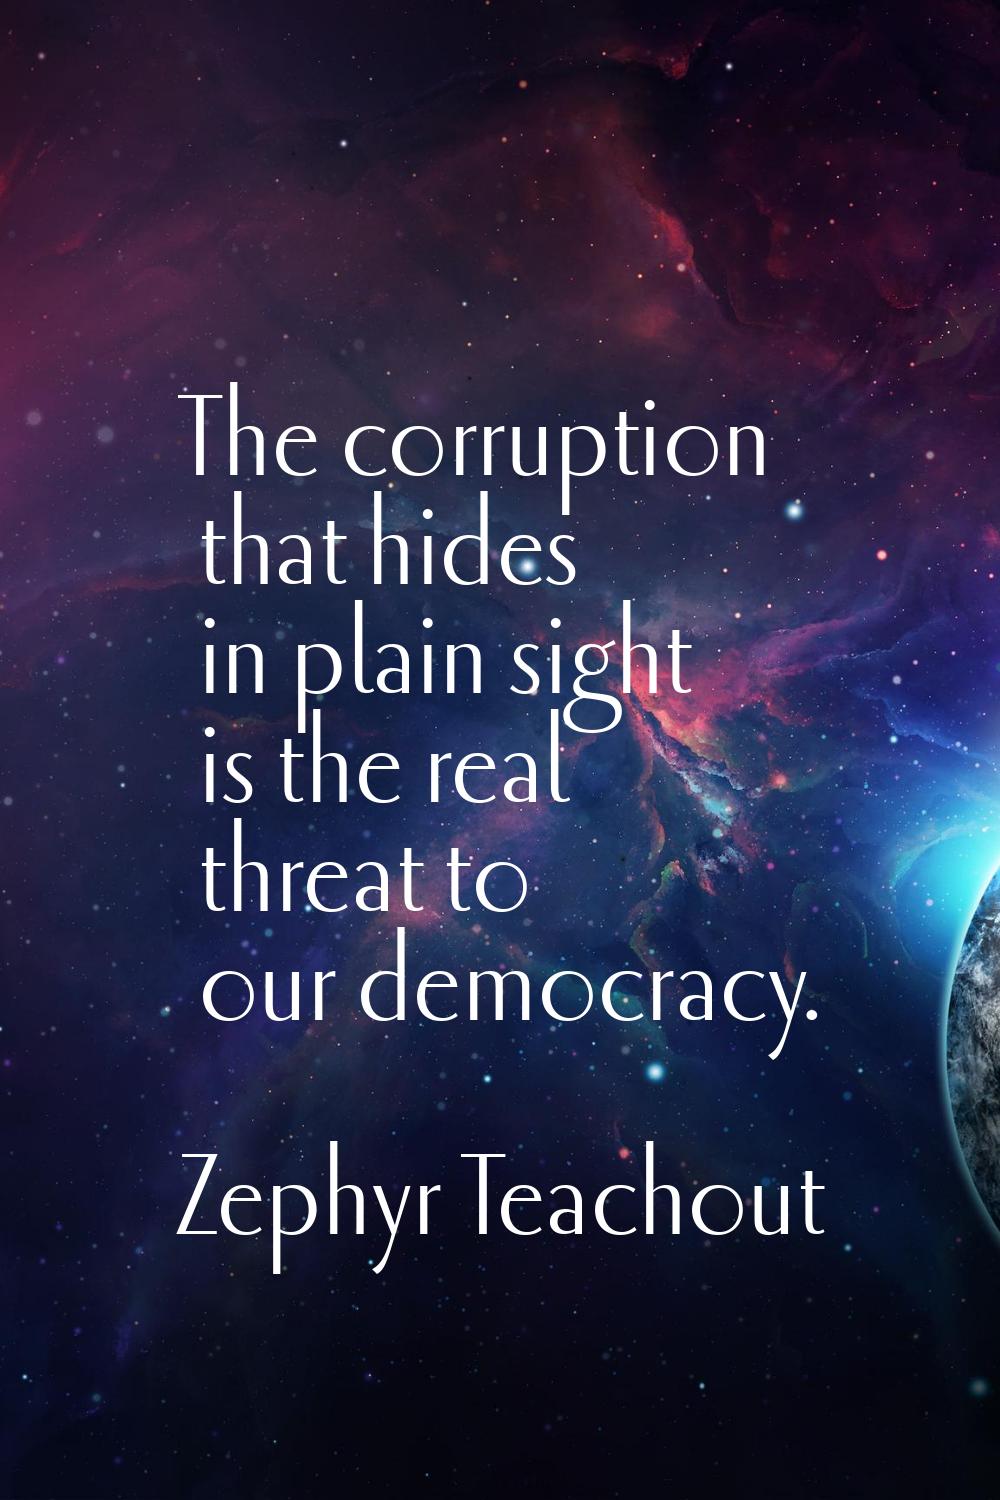 The corruption that hides in plain sight is the real threat to our democracy.